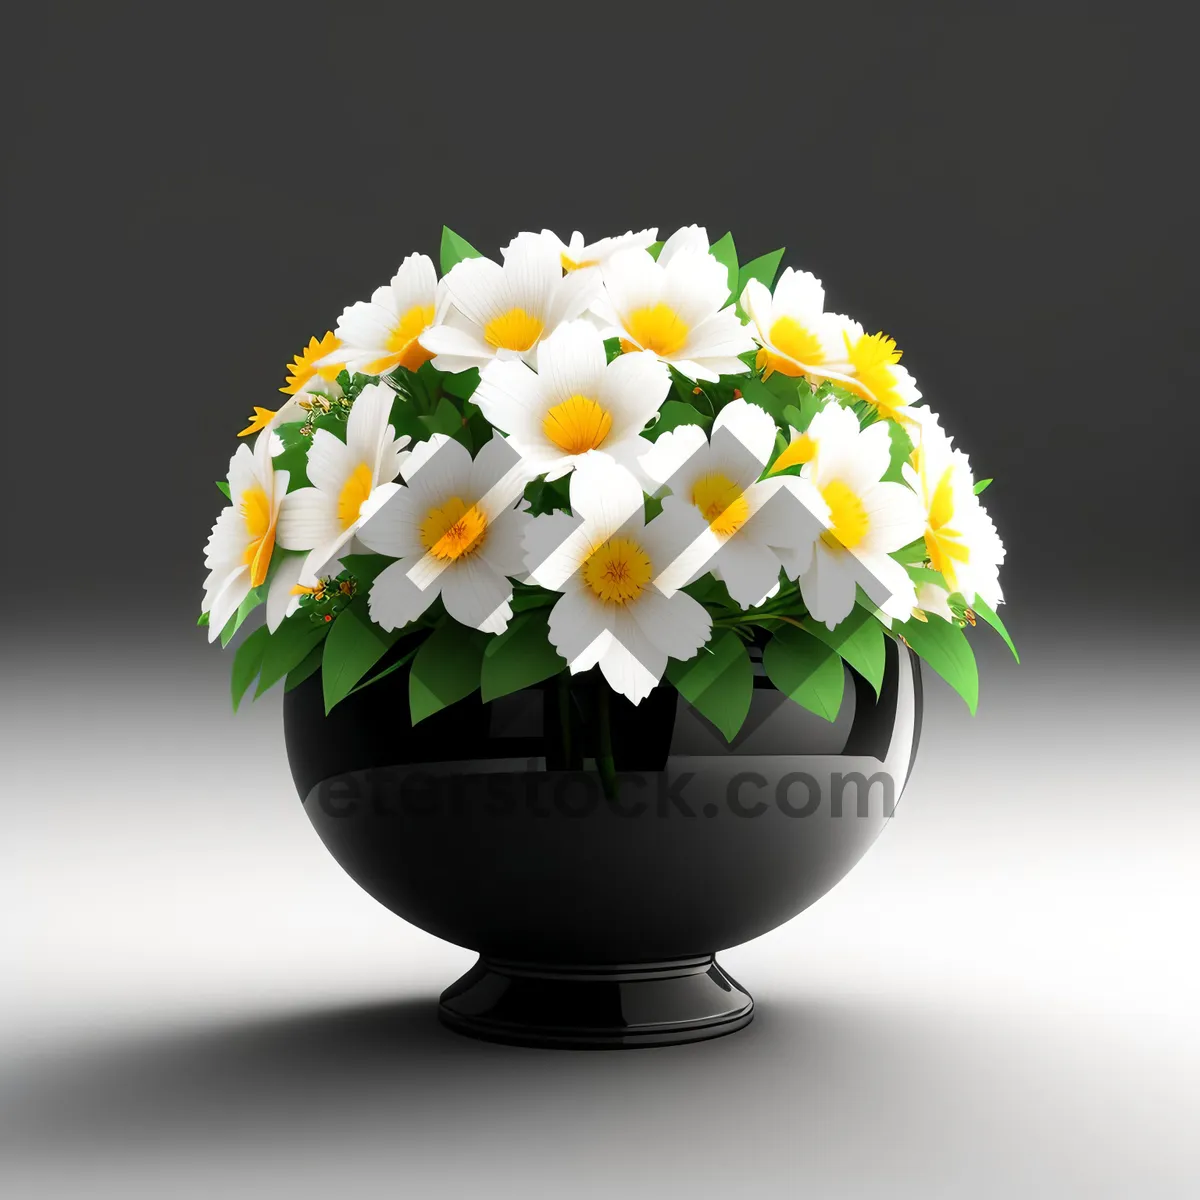 Picture of Japanese Spring Blossom Bouquet: Delicate White Floral Petals